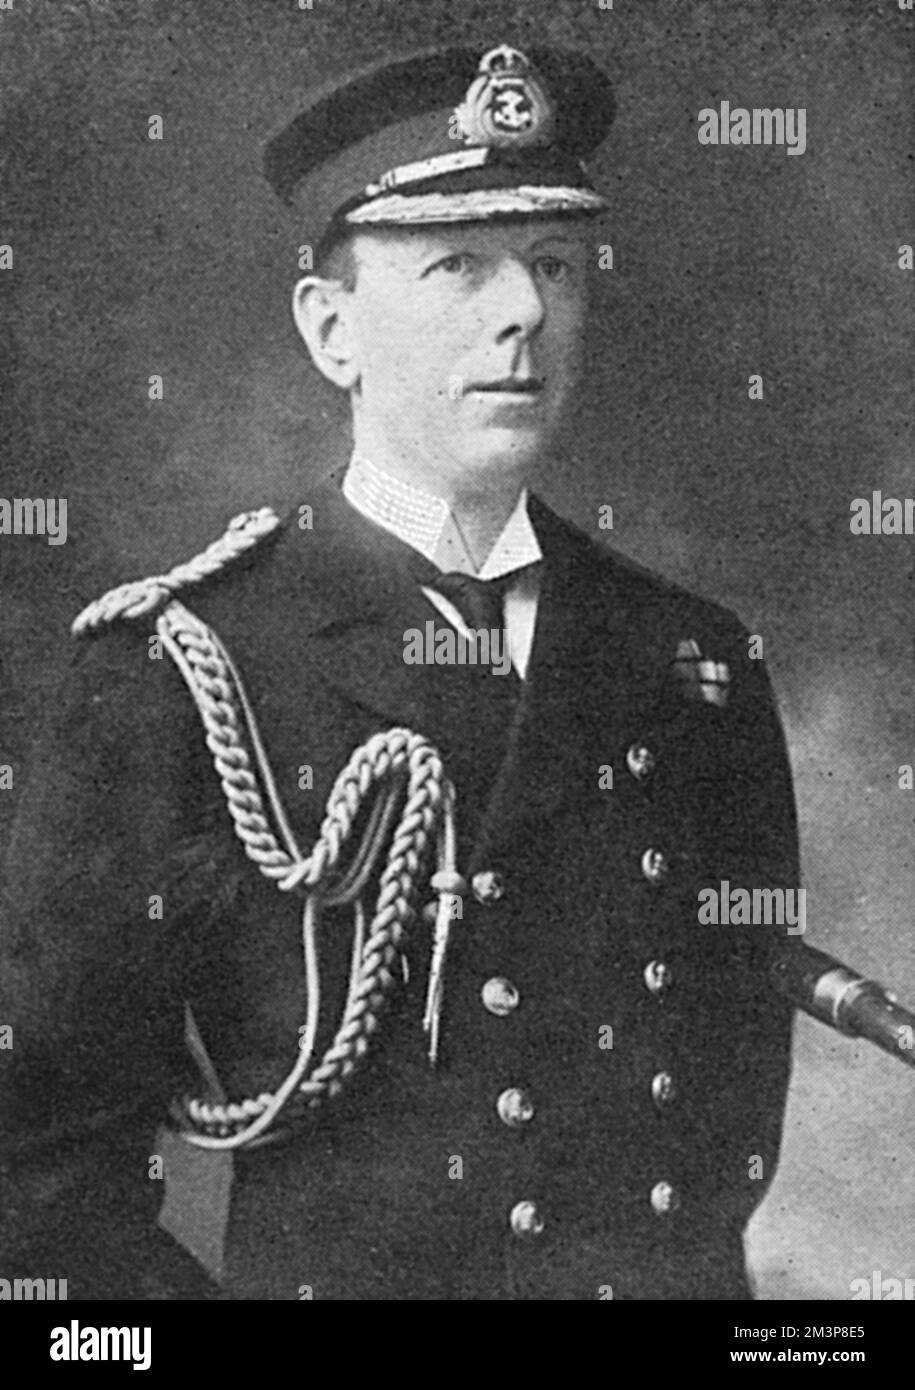 Vice-Admiral Sir Stanley Cecil James Colville (1861 - 1939), photographed while in command of the First Battle Squadron of the Royal Navy. He was promoted to Admiral shortly after the outbreak of war and in 1916 was appointed Commander-in-Chief, Portsmouth Stock Photo